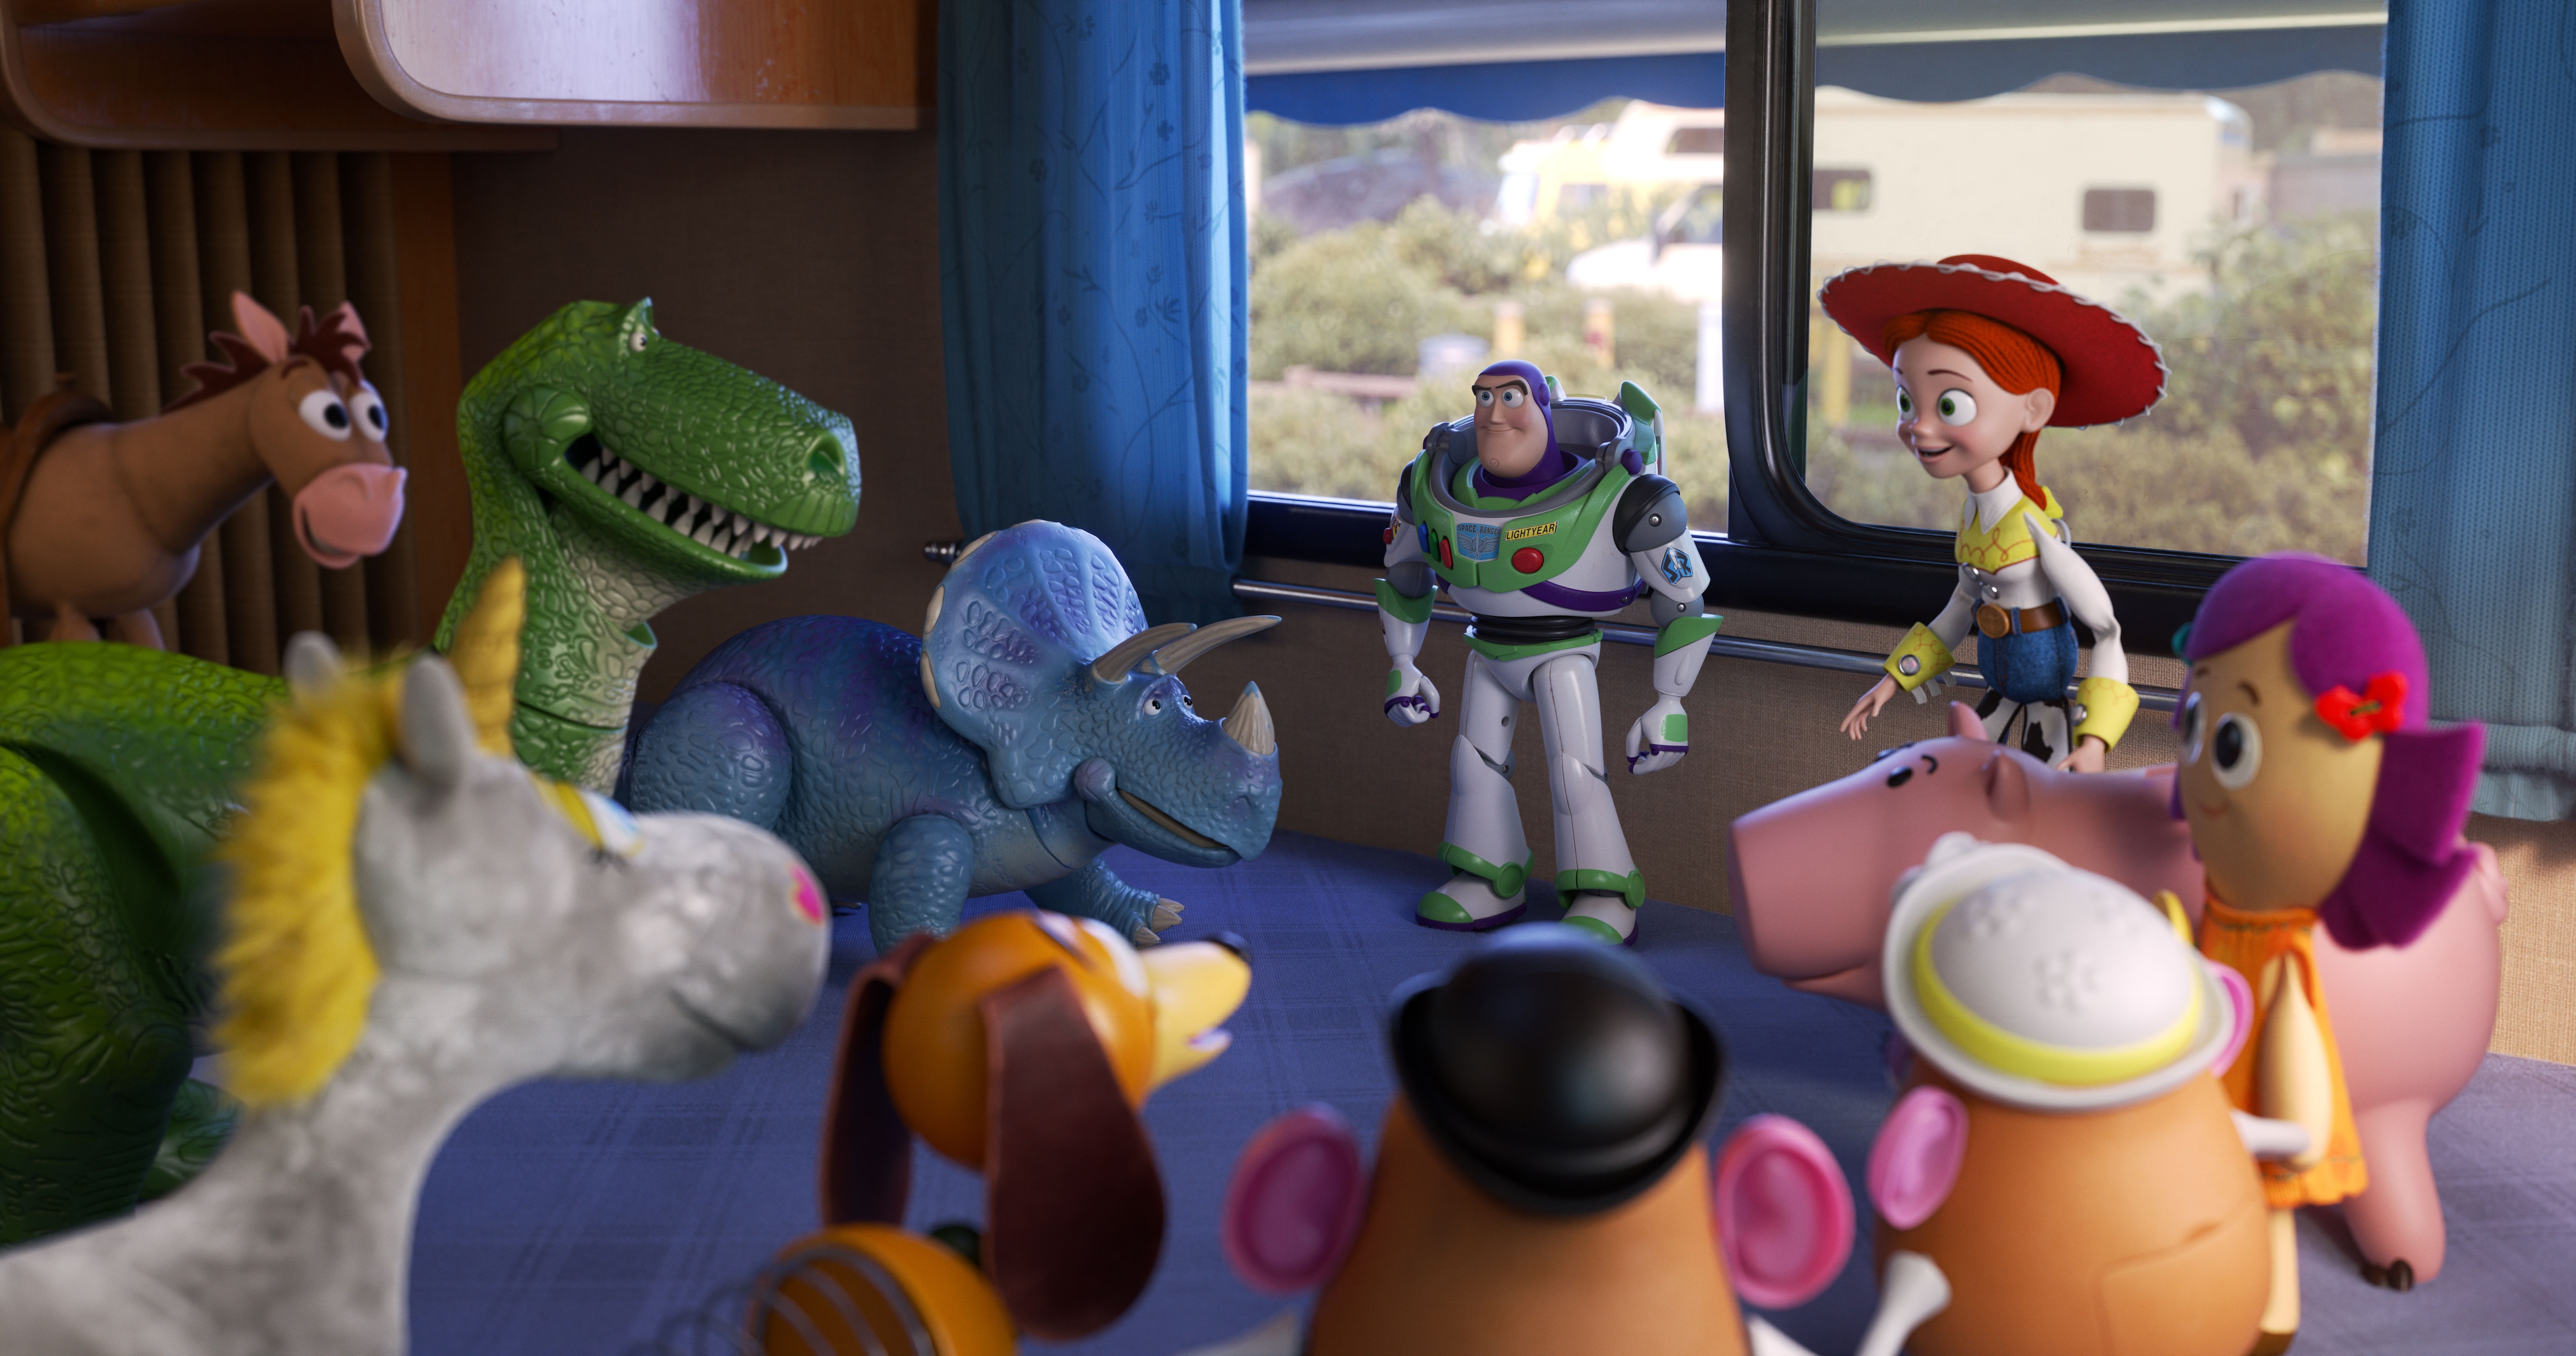 Toy Story 4 group shot